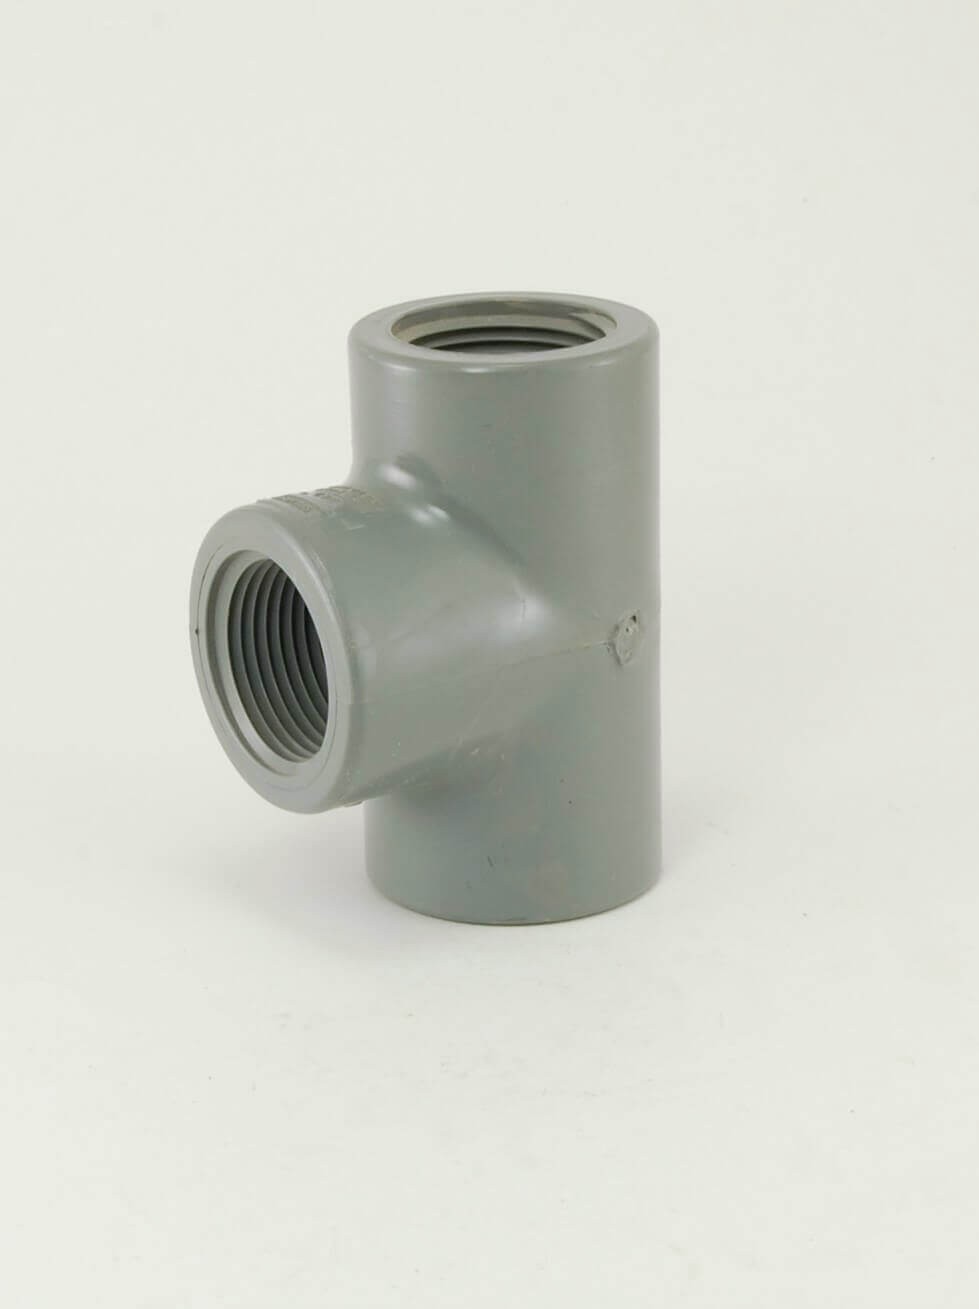 Sch 80 Grey CPVC Tee th - Schedule 80 Fittings CPVC - Schedule 40 & 80 PVC Pipe & Fittings